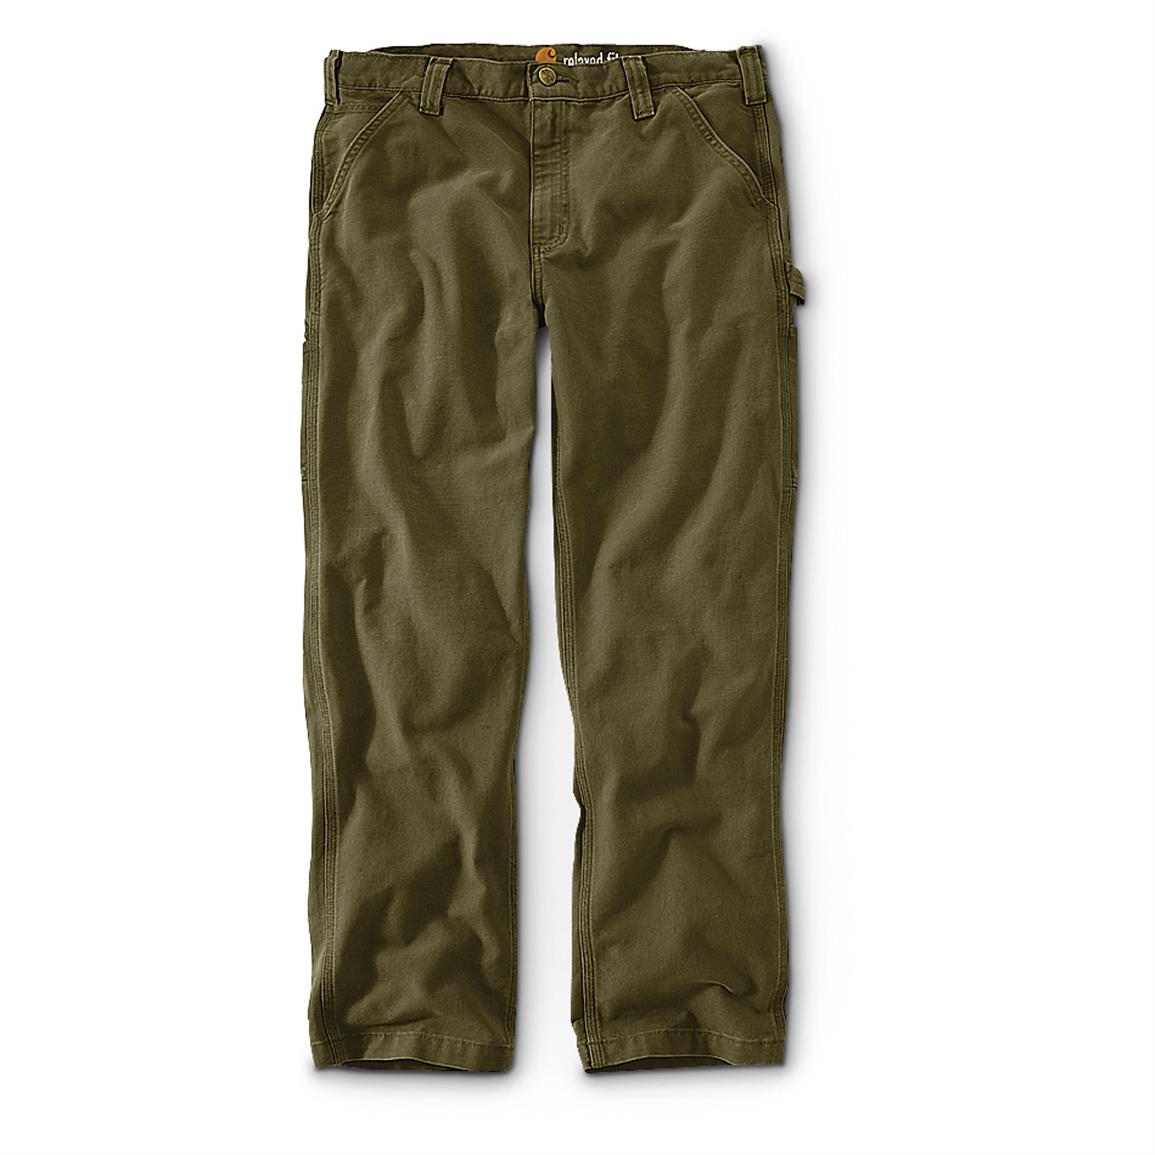 Carhartt Weathered Duck Work Pants - 640204, Jeans & Pants at Sportsman ...